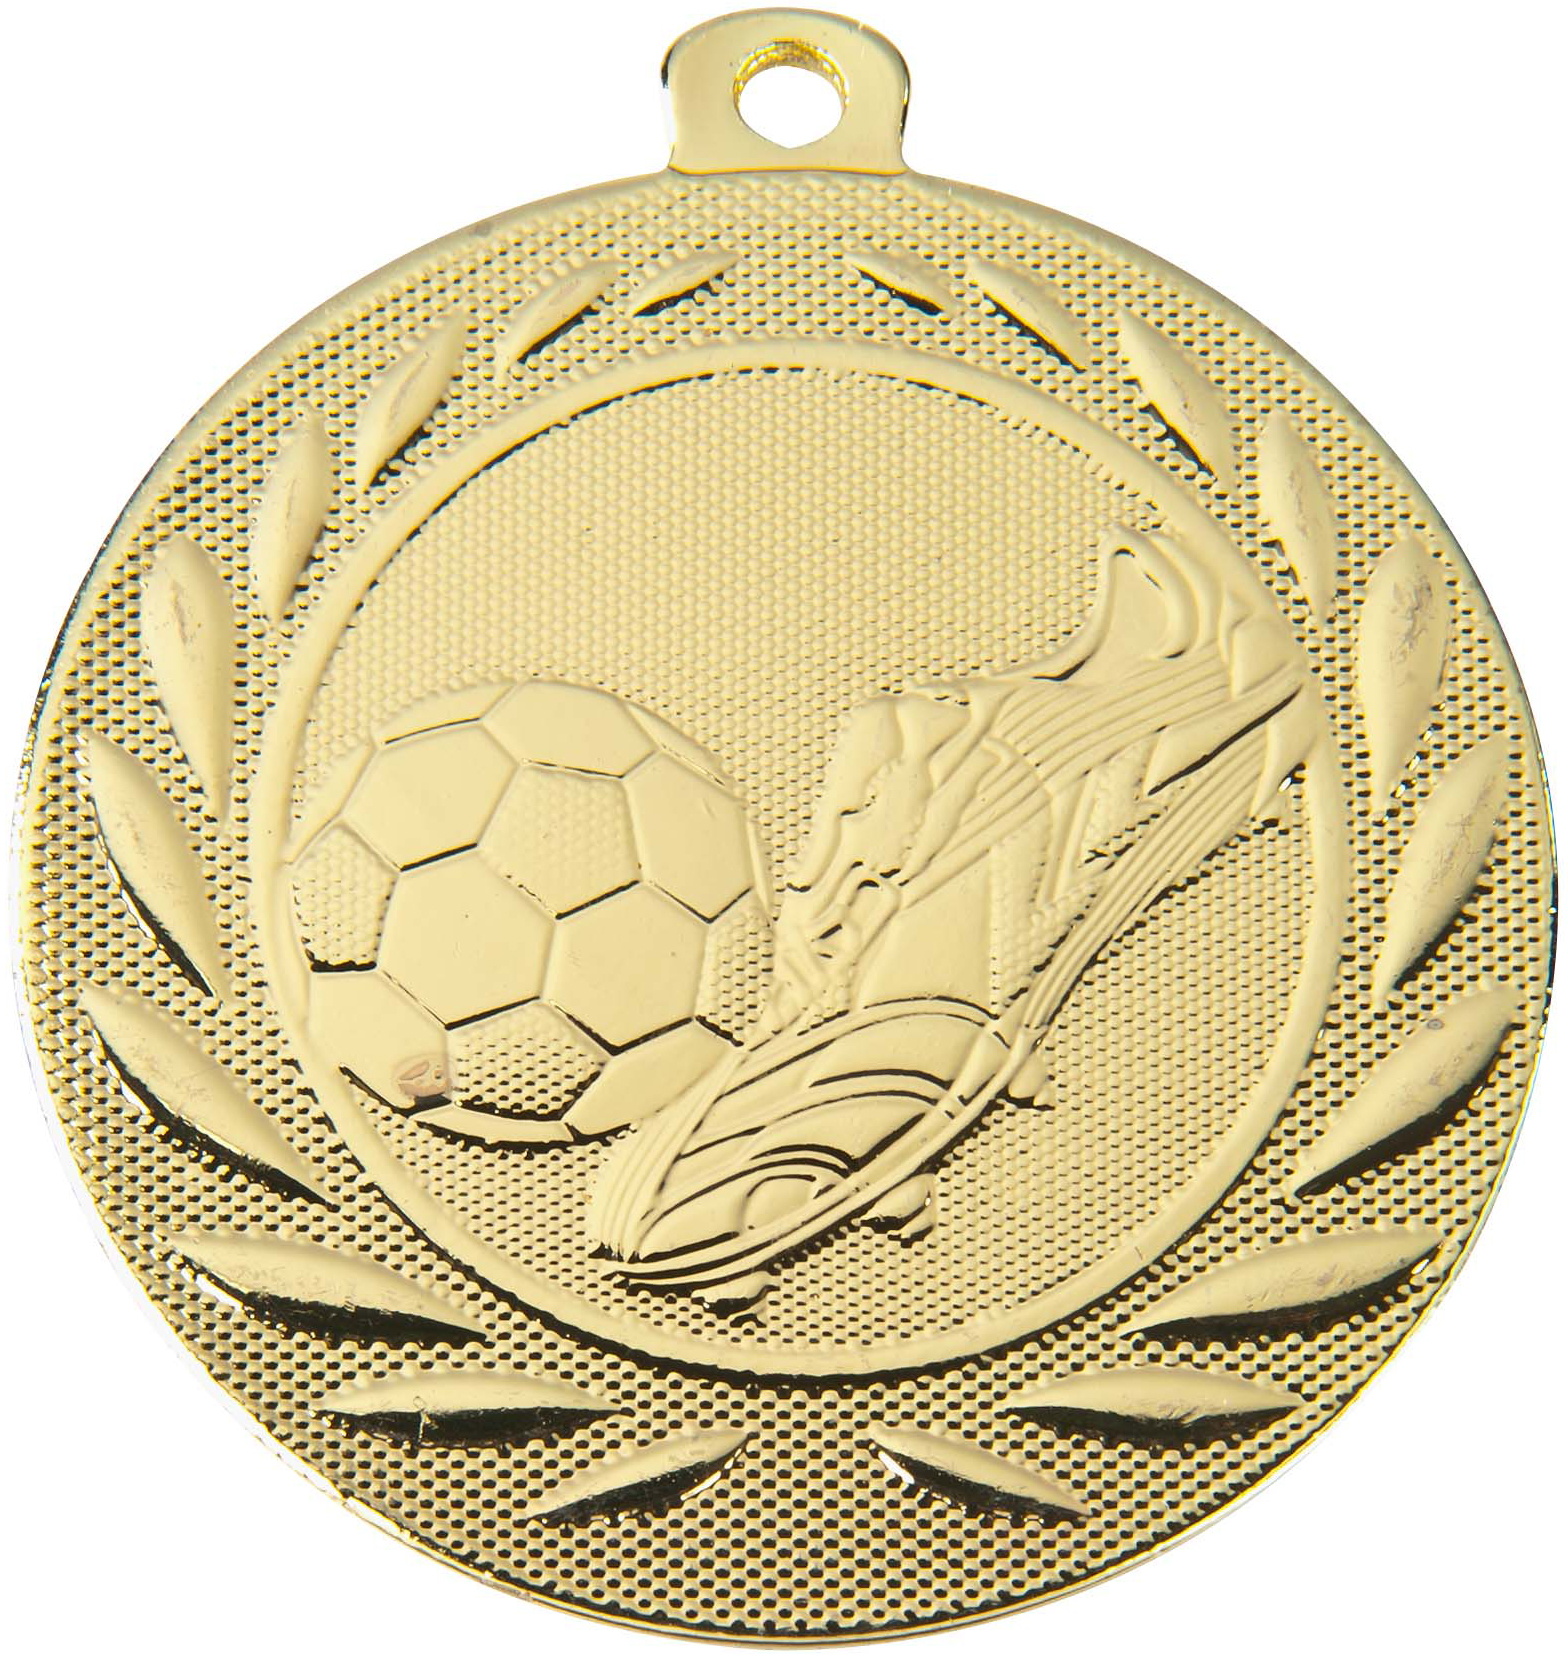 Football Medals - Football Boot and Ball Gallant Medal Gold 50mm (2")